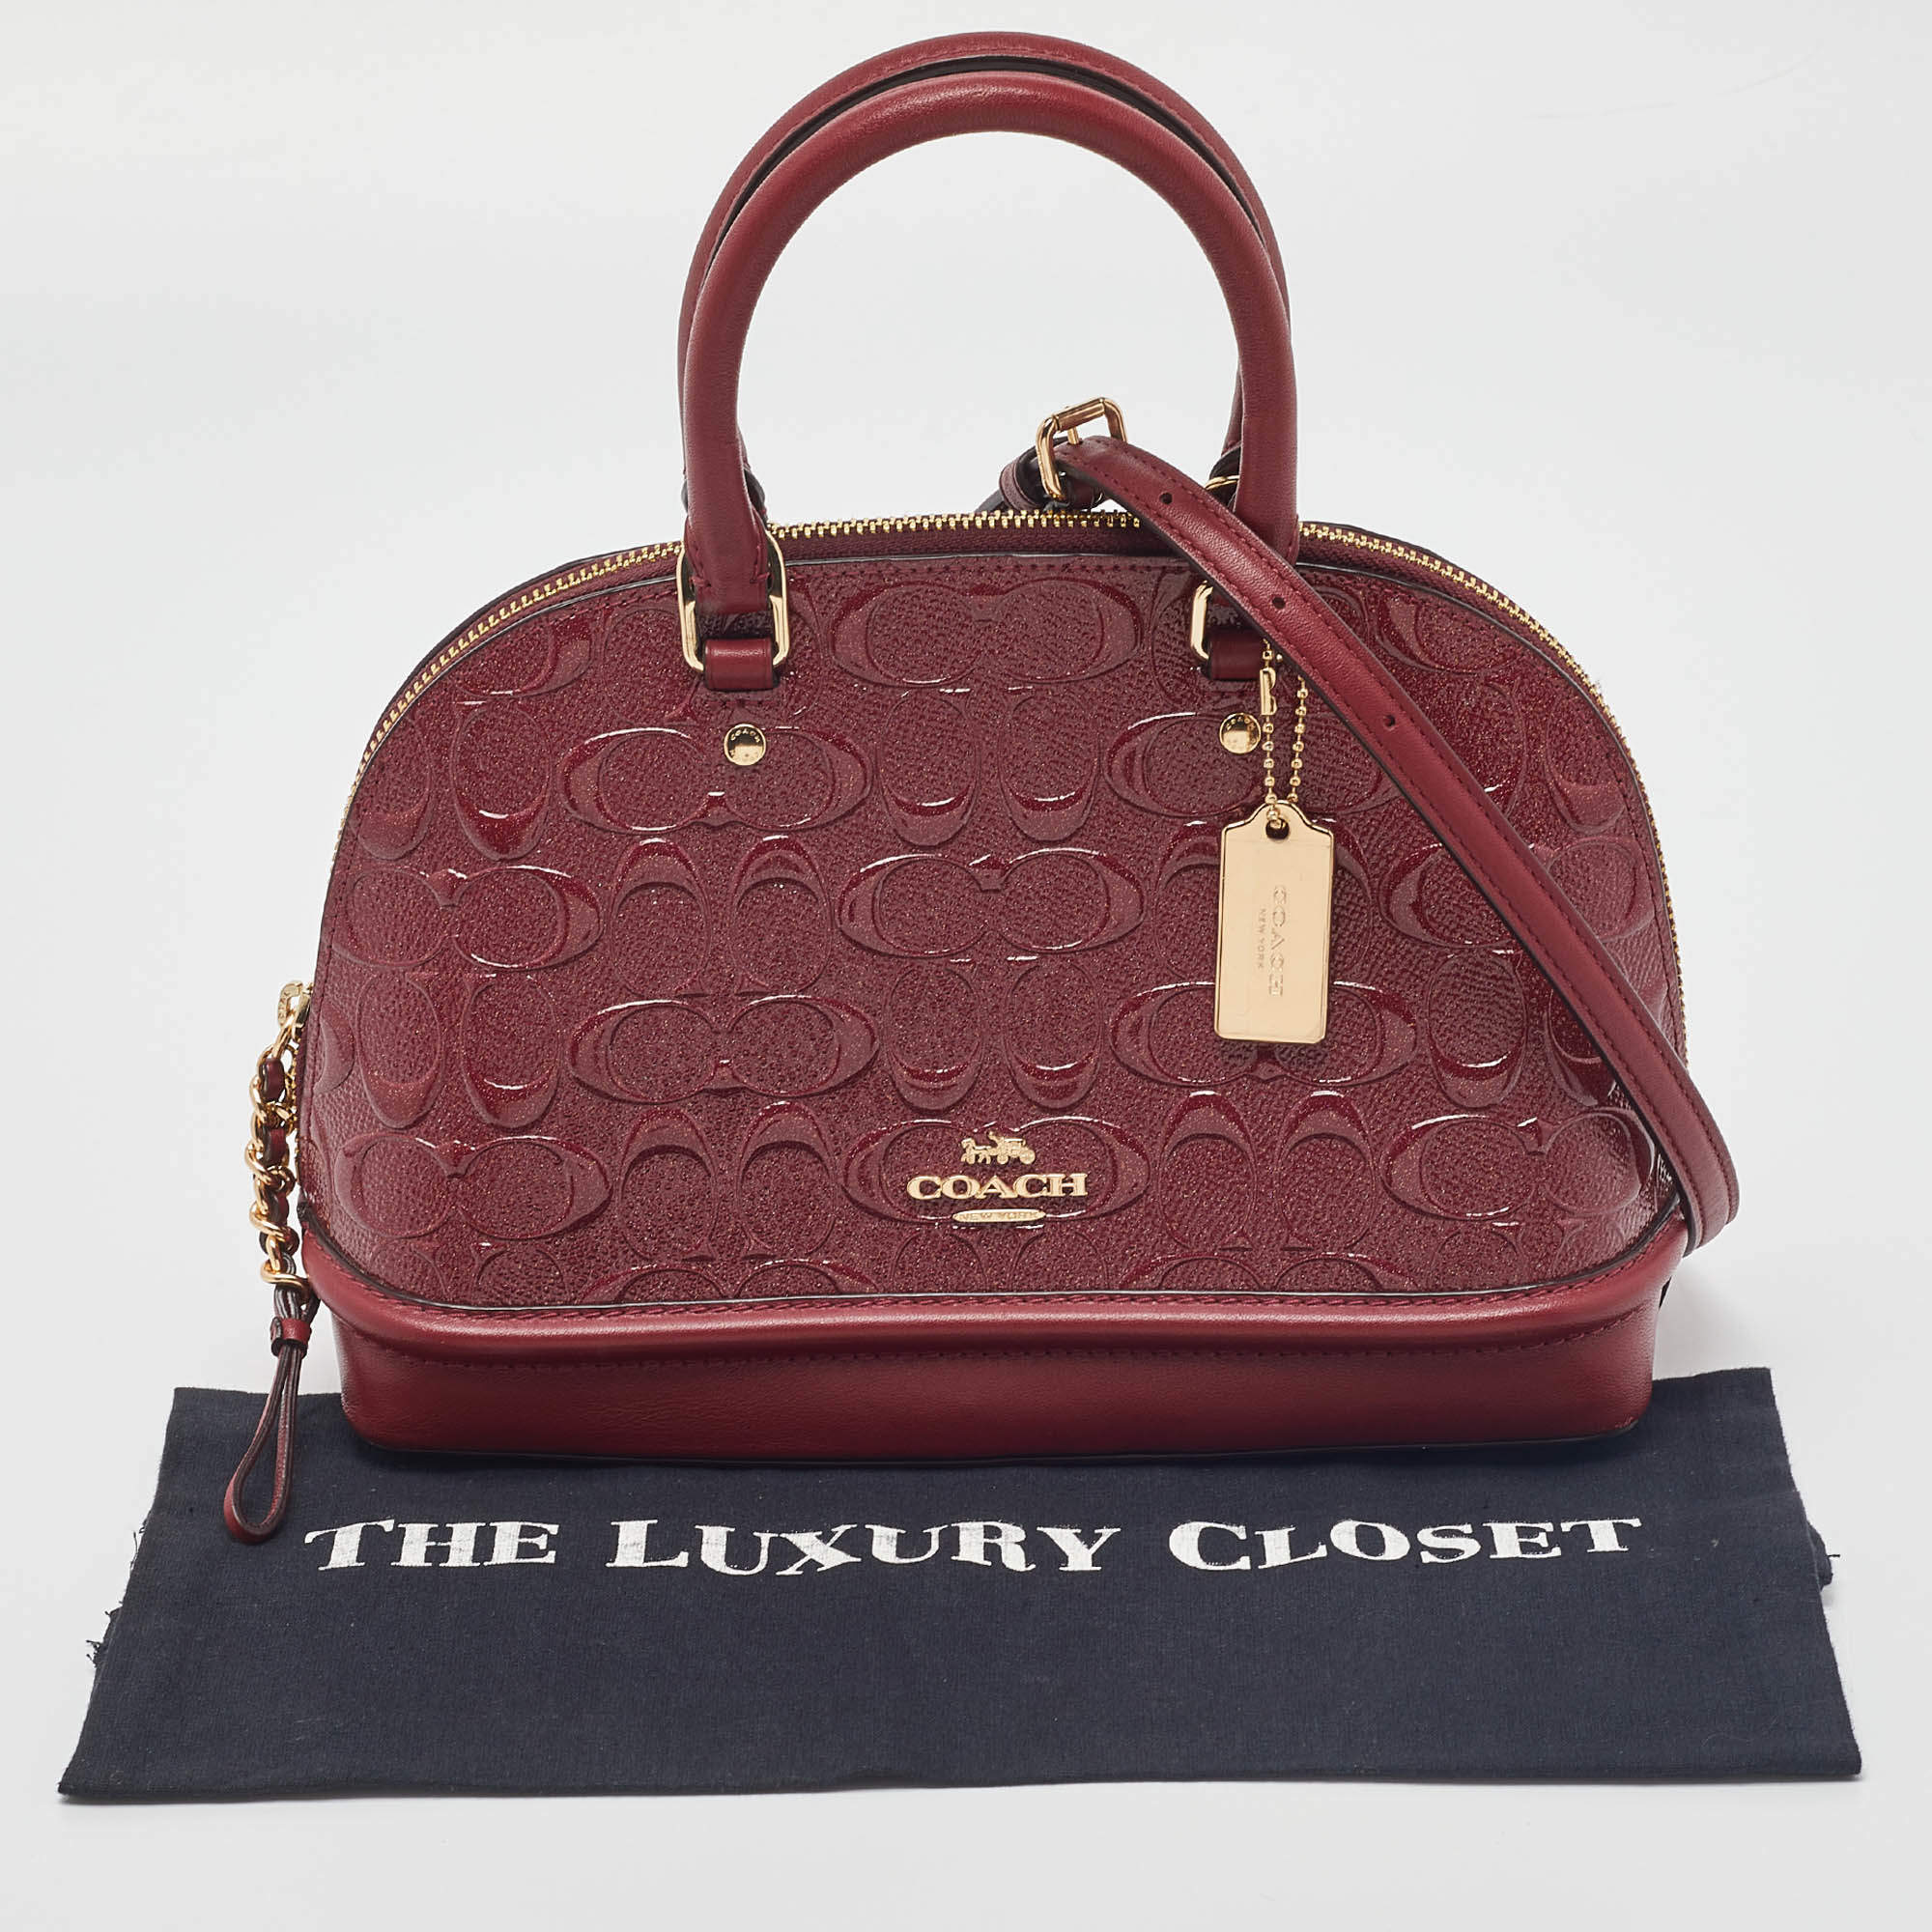 Red Coach Purse And Wallet Set - Gem